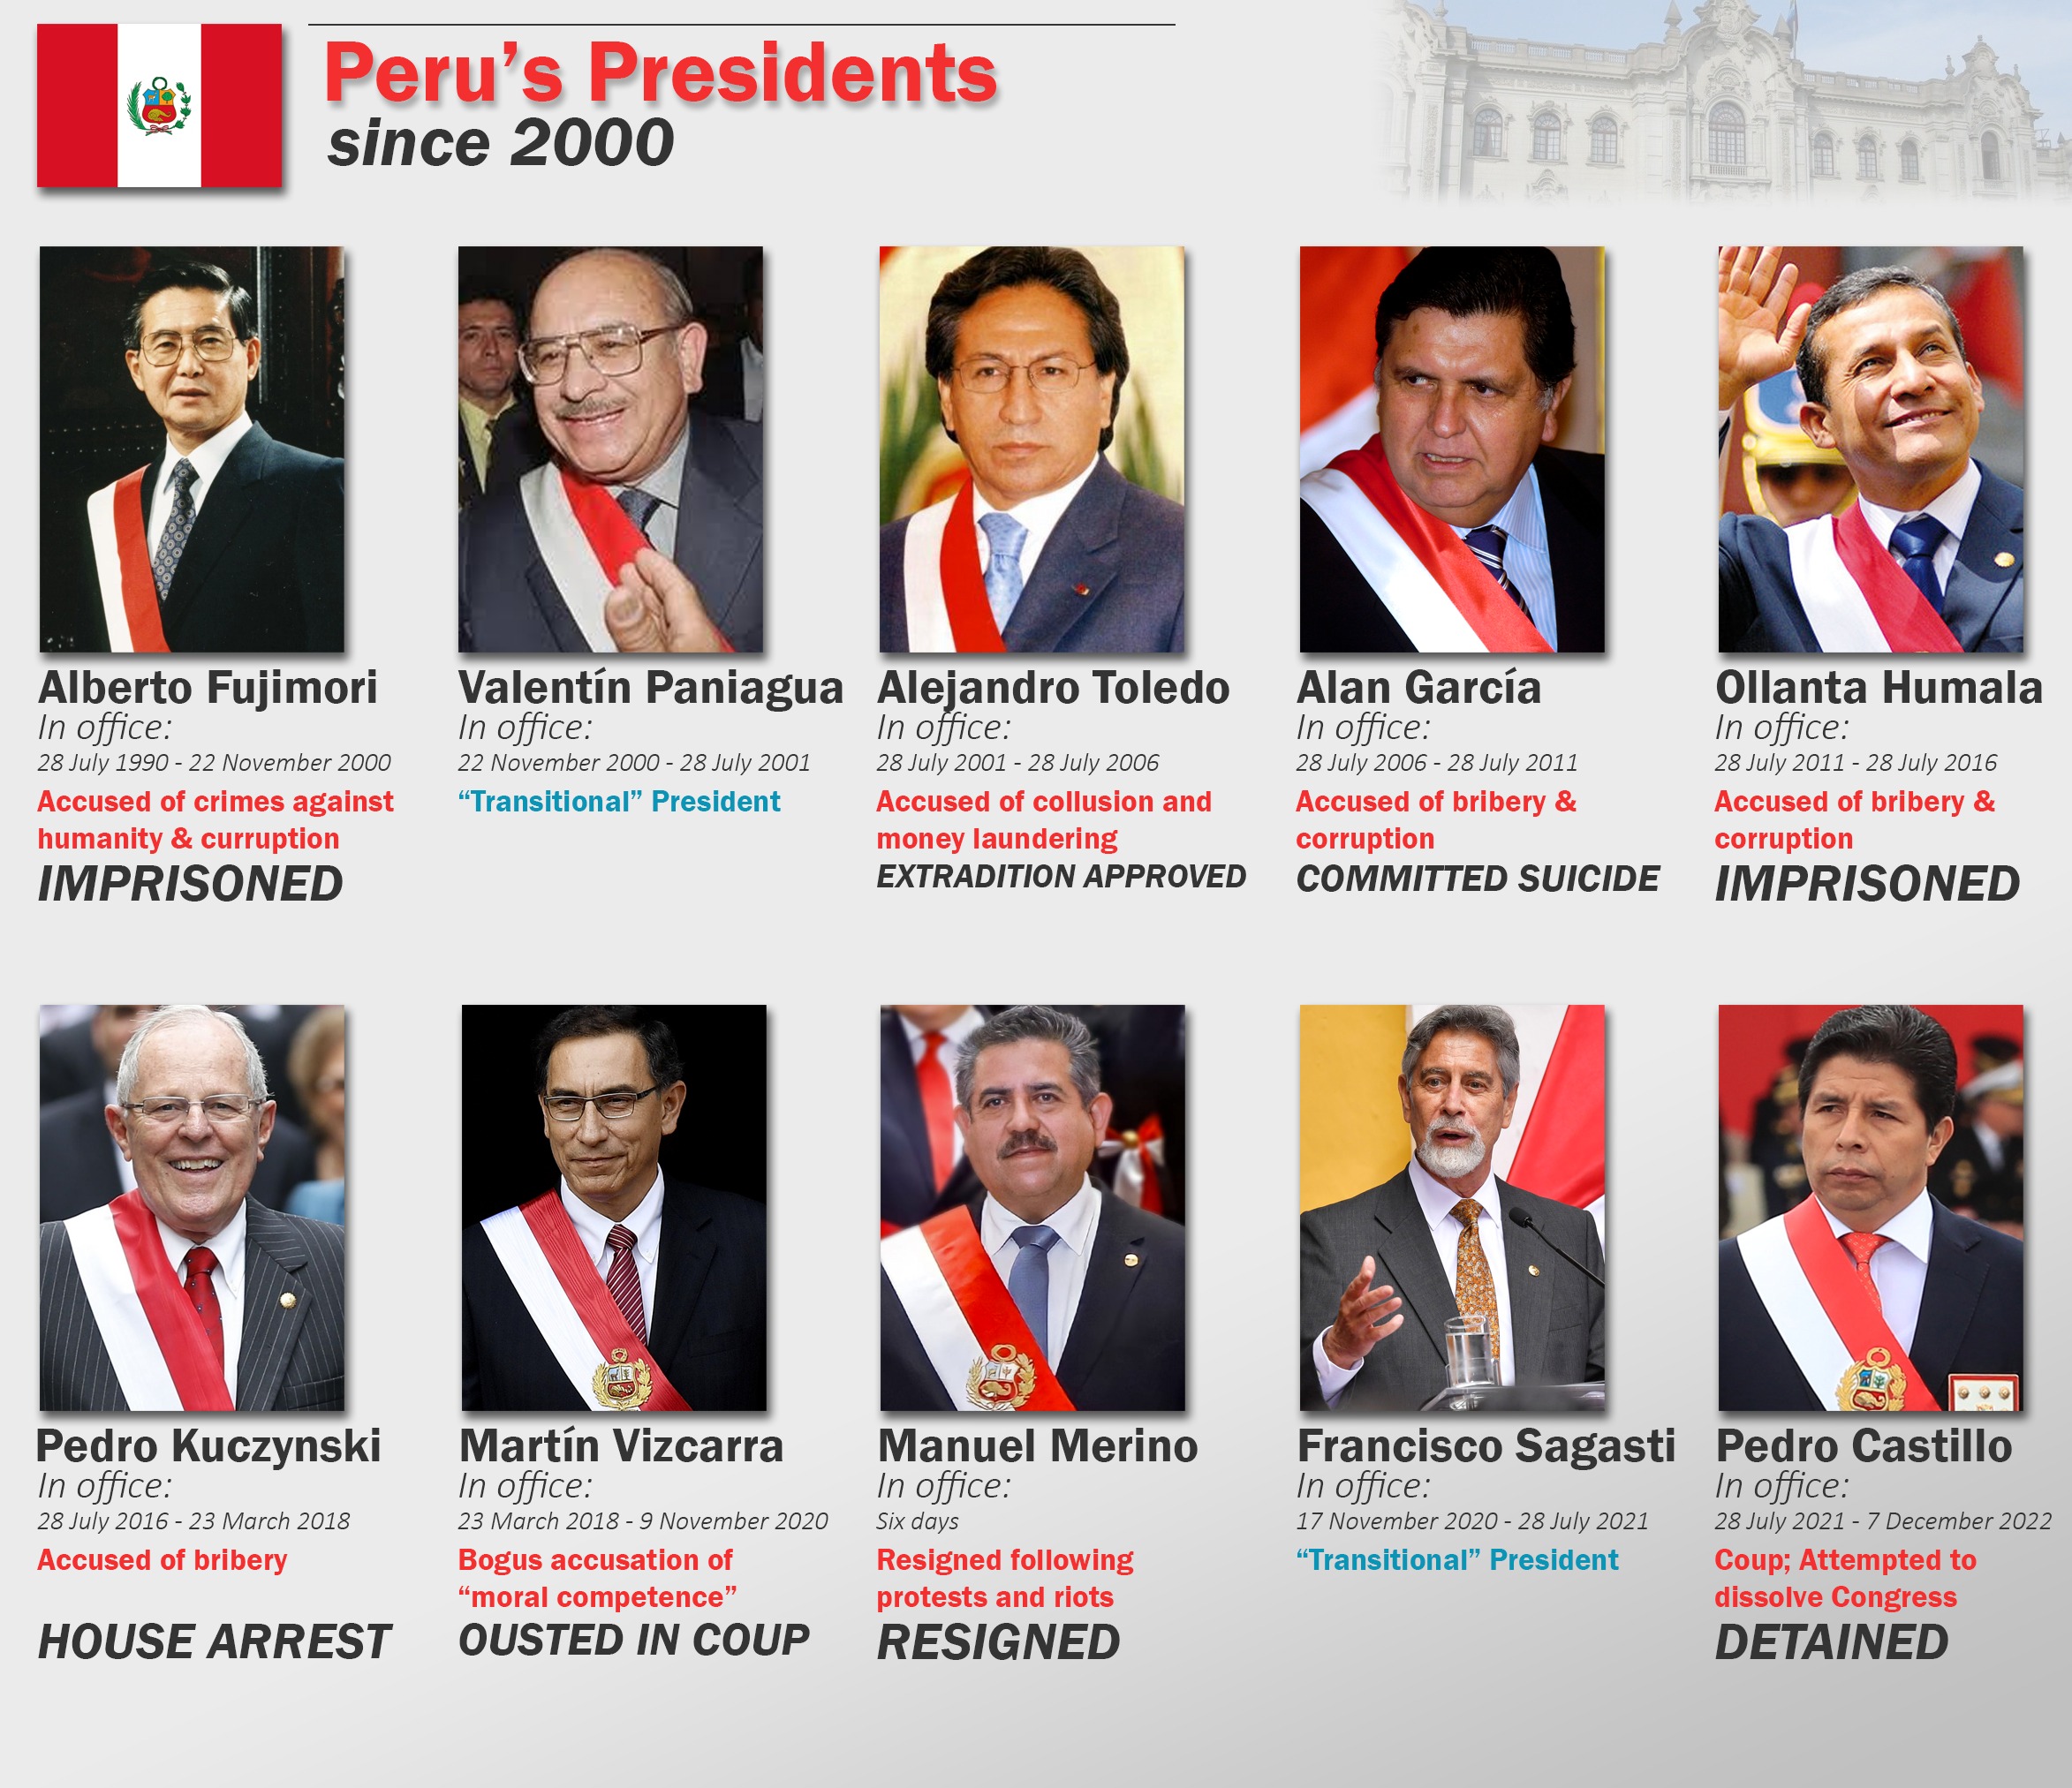 The Presidents of Peru since 2000 and their fates